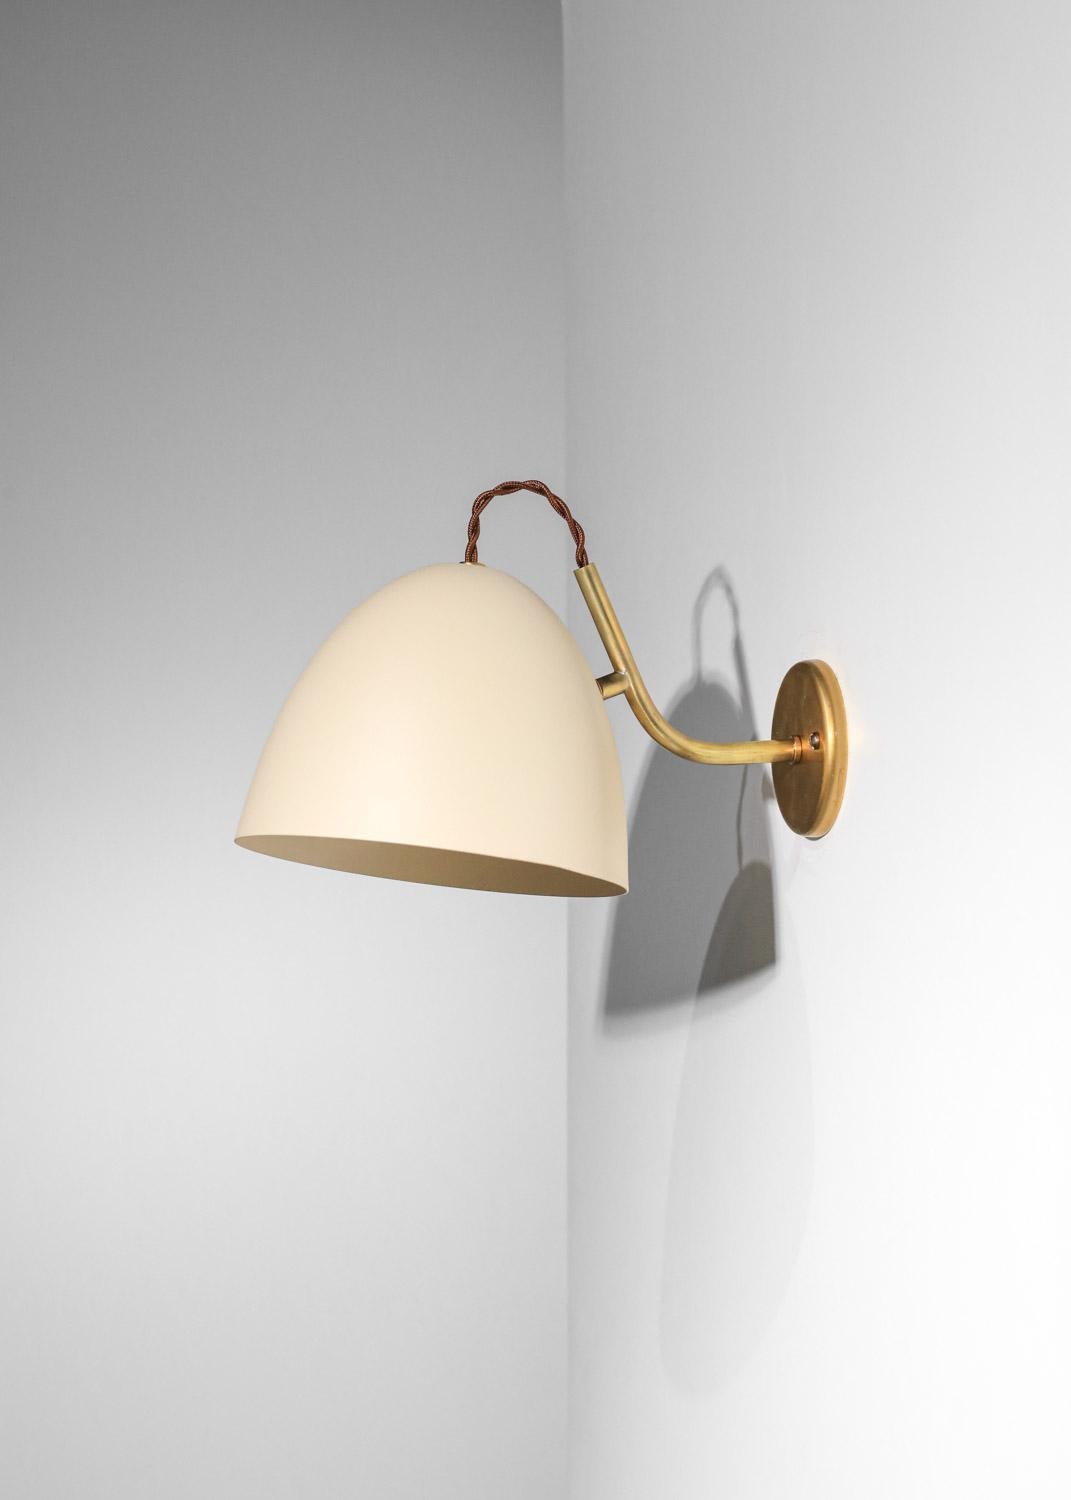 This pair of wall lights is made up of a lacquered metal lampshade with textured white paint and a solid brass structure. We recommend one E14 type LED bulb per wall light.